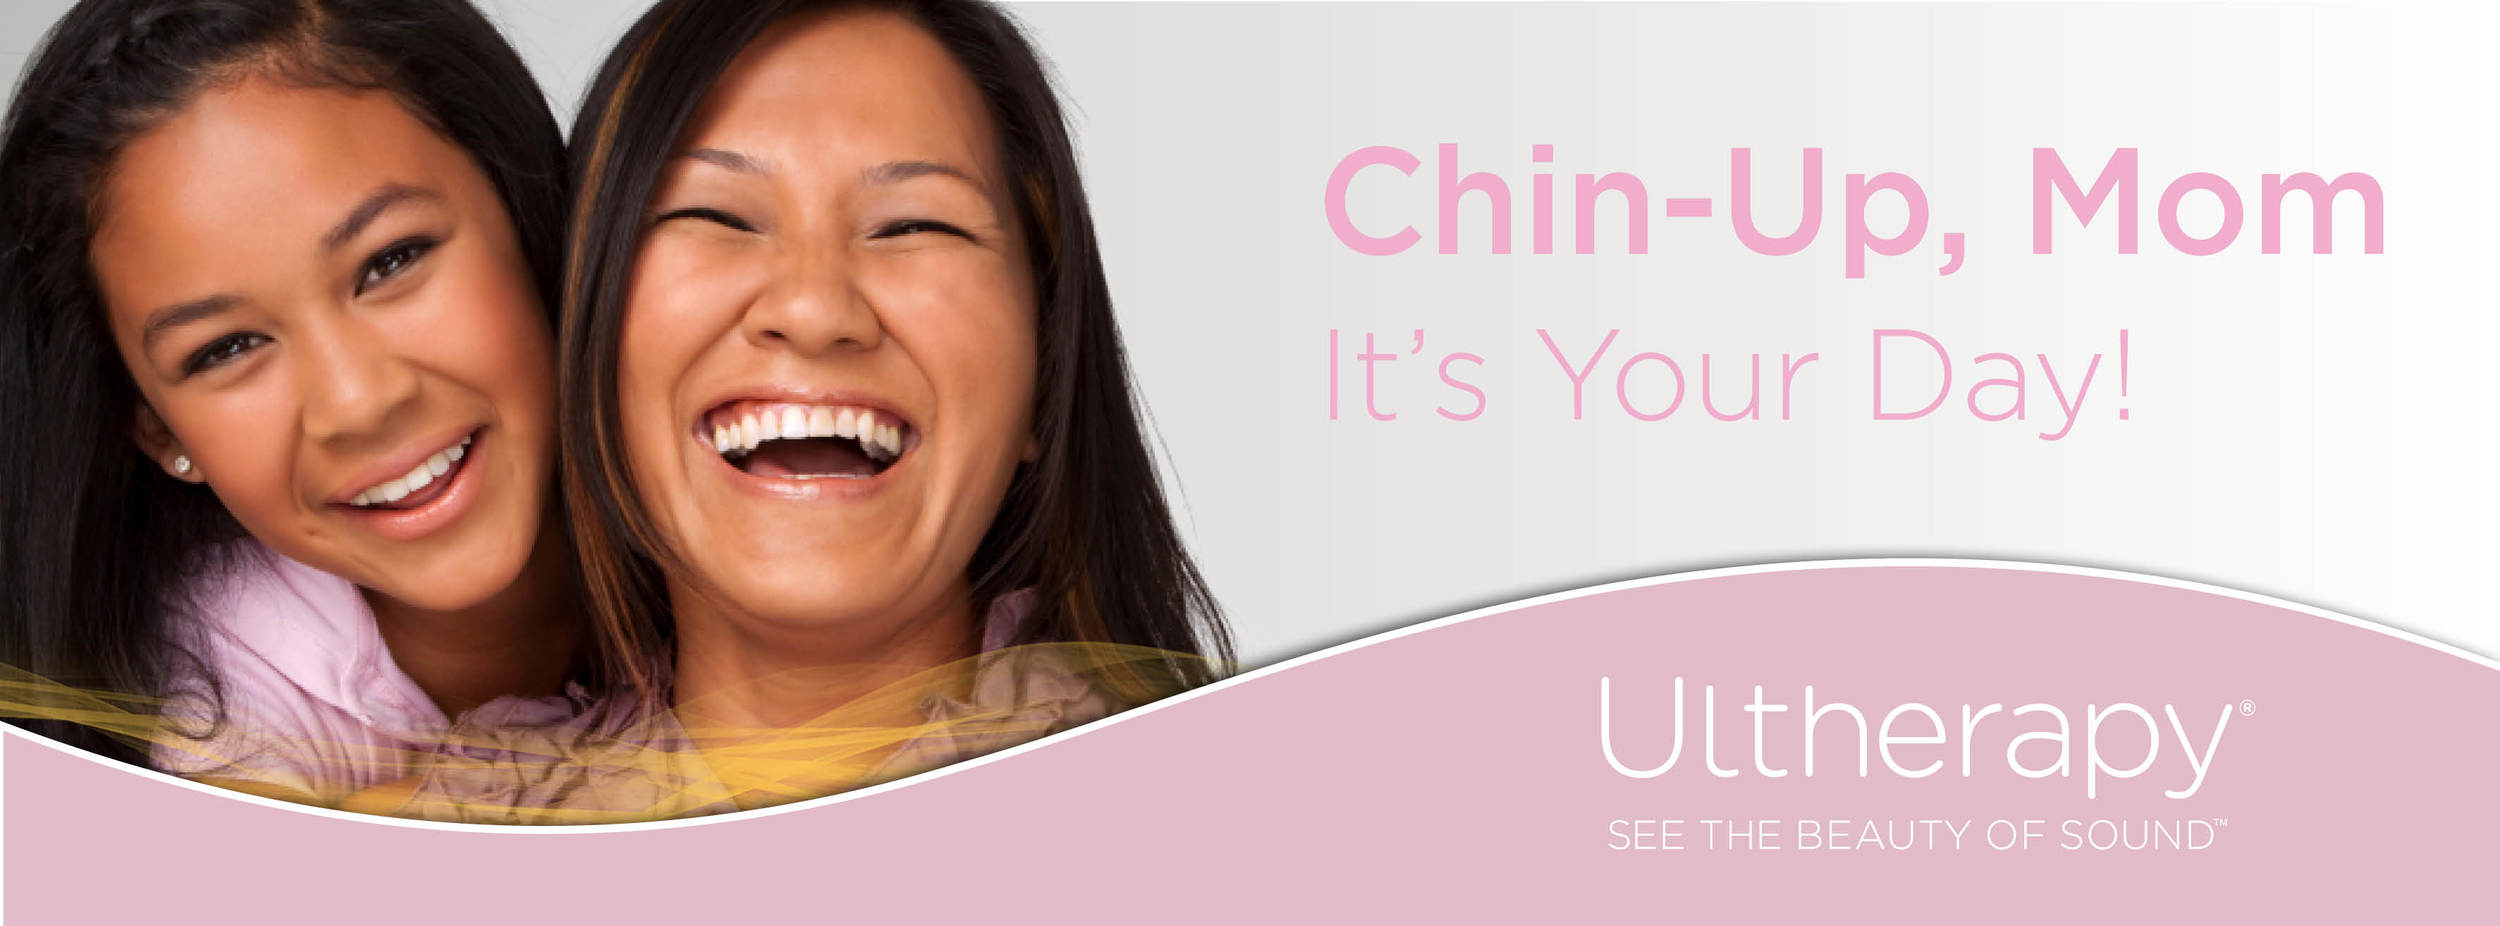 Chin-Up Mom &#8211; It&#8217;s Your Day!  Ultherapy for Mother&#8217;s Day